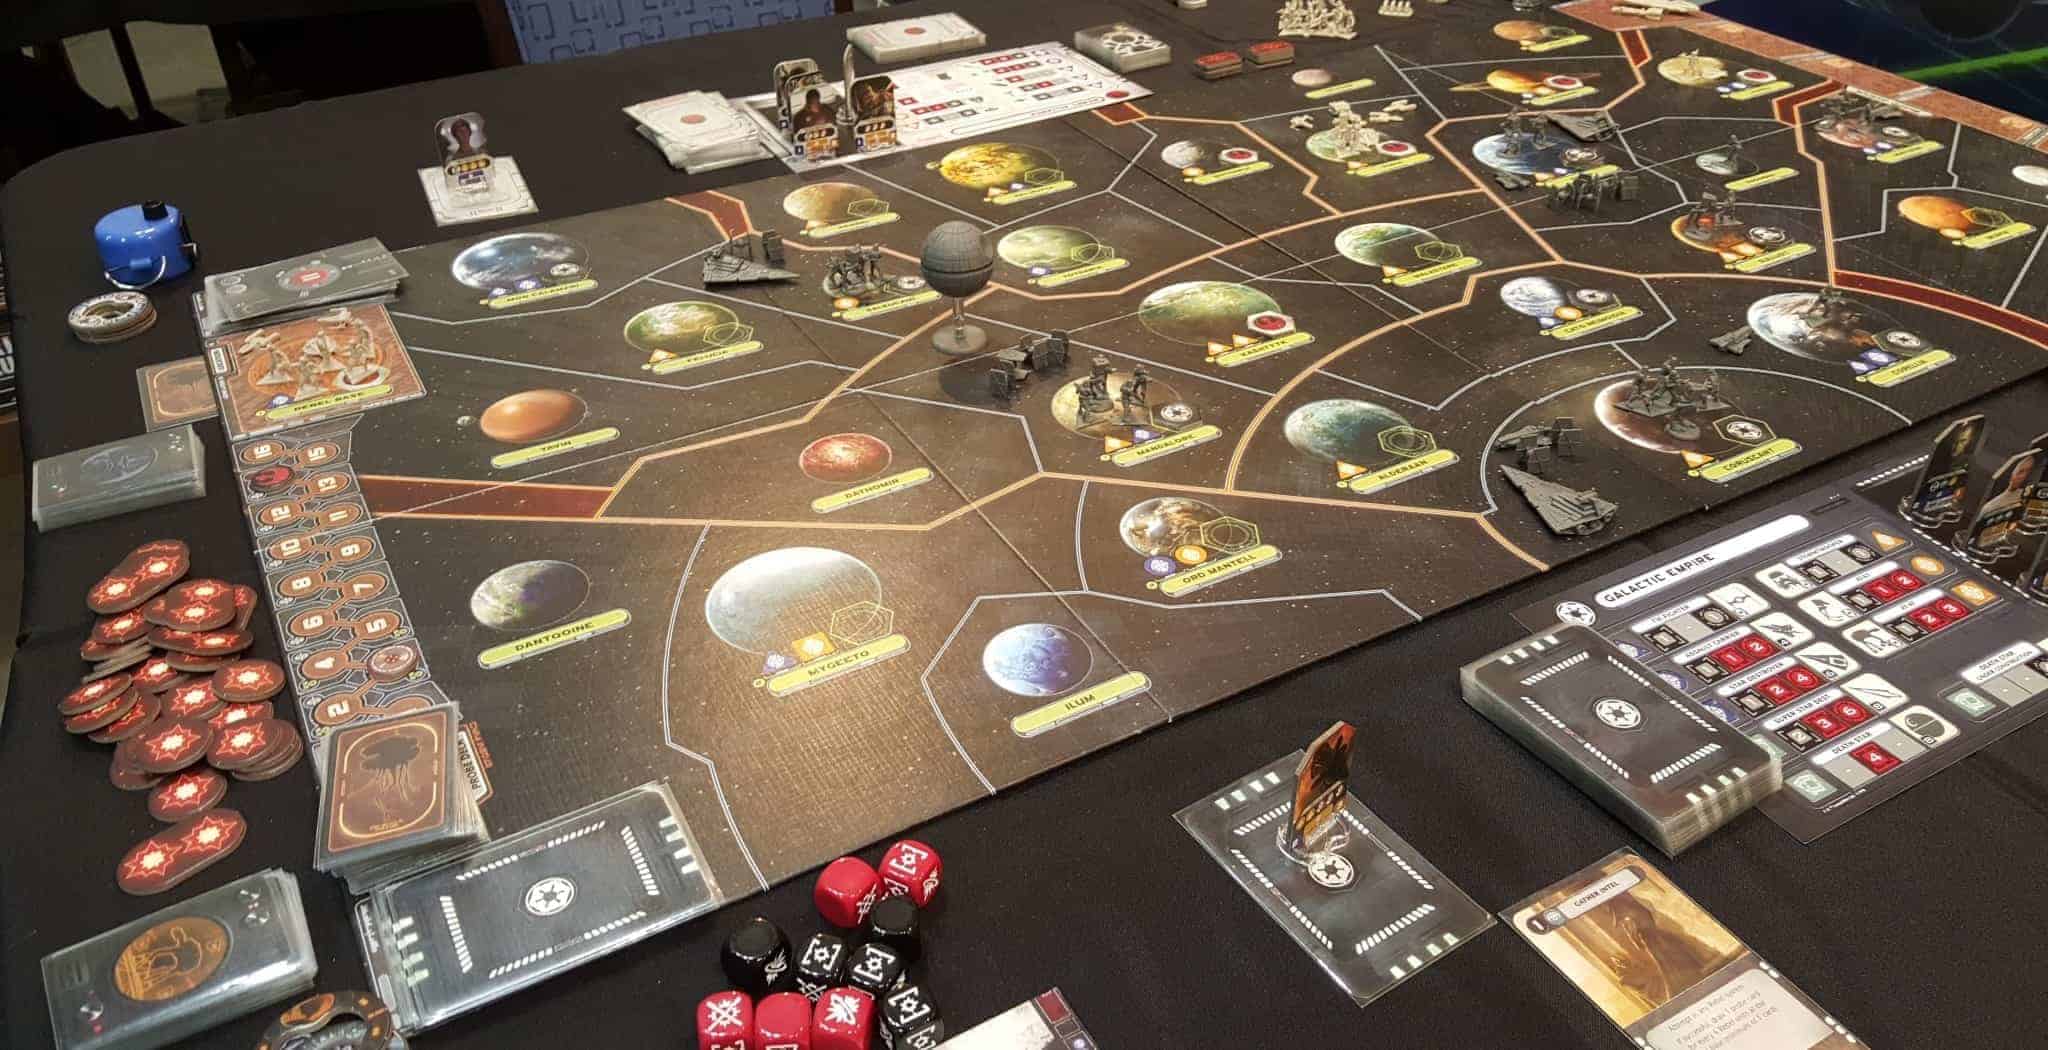 As one of the best 2 player strategy board games Star Wars: Rebellion is definitely a board game to consider.